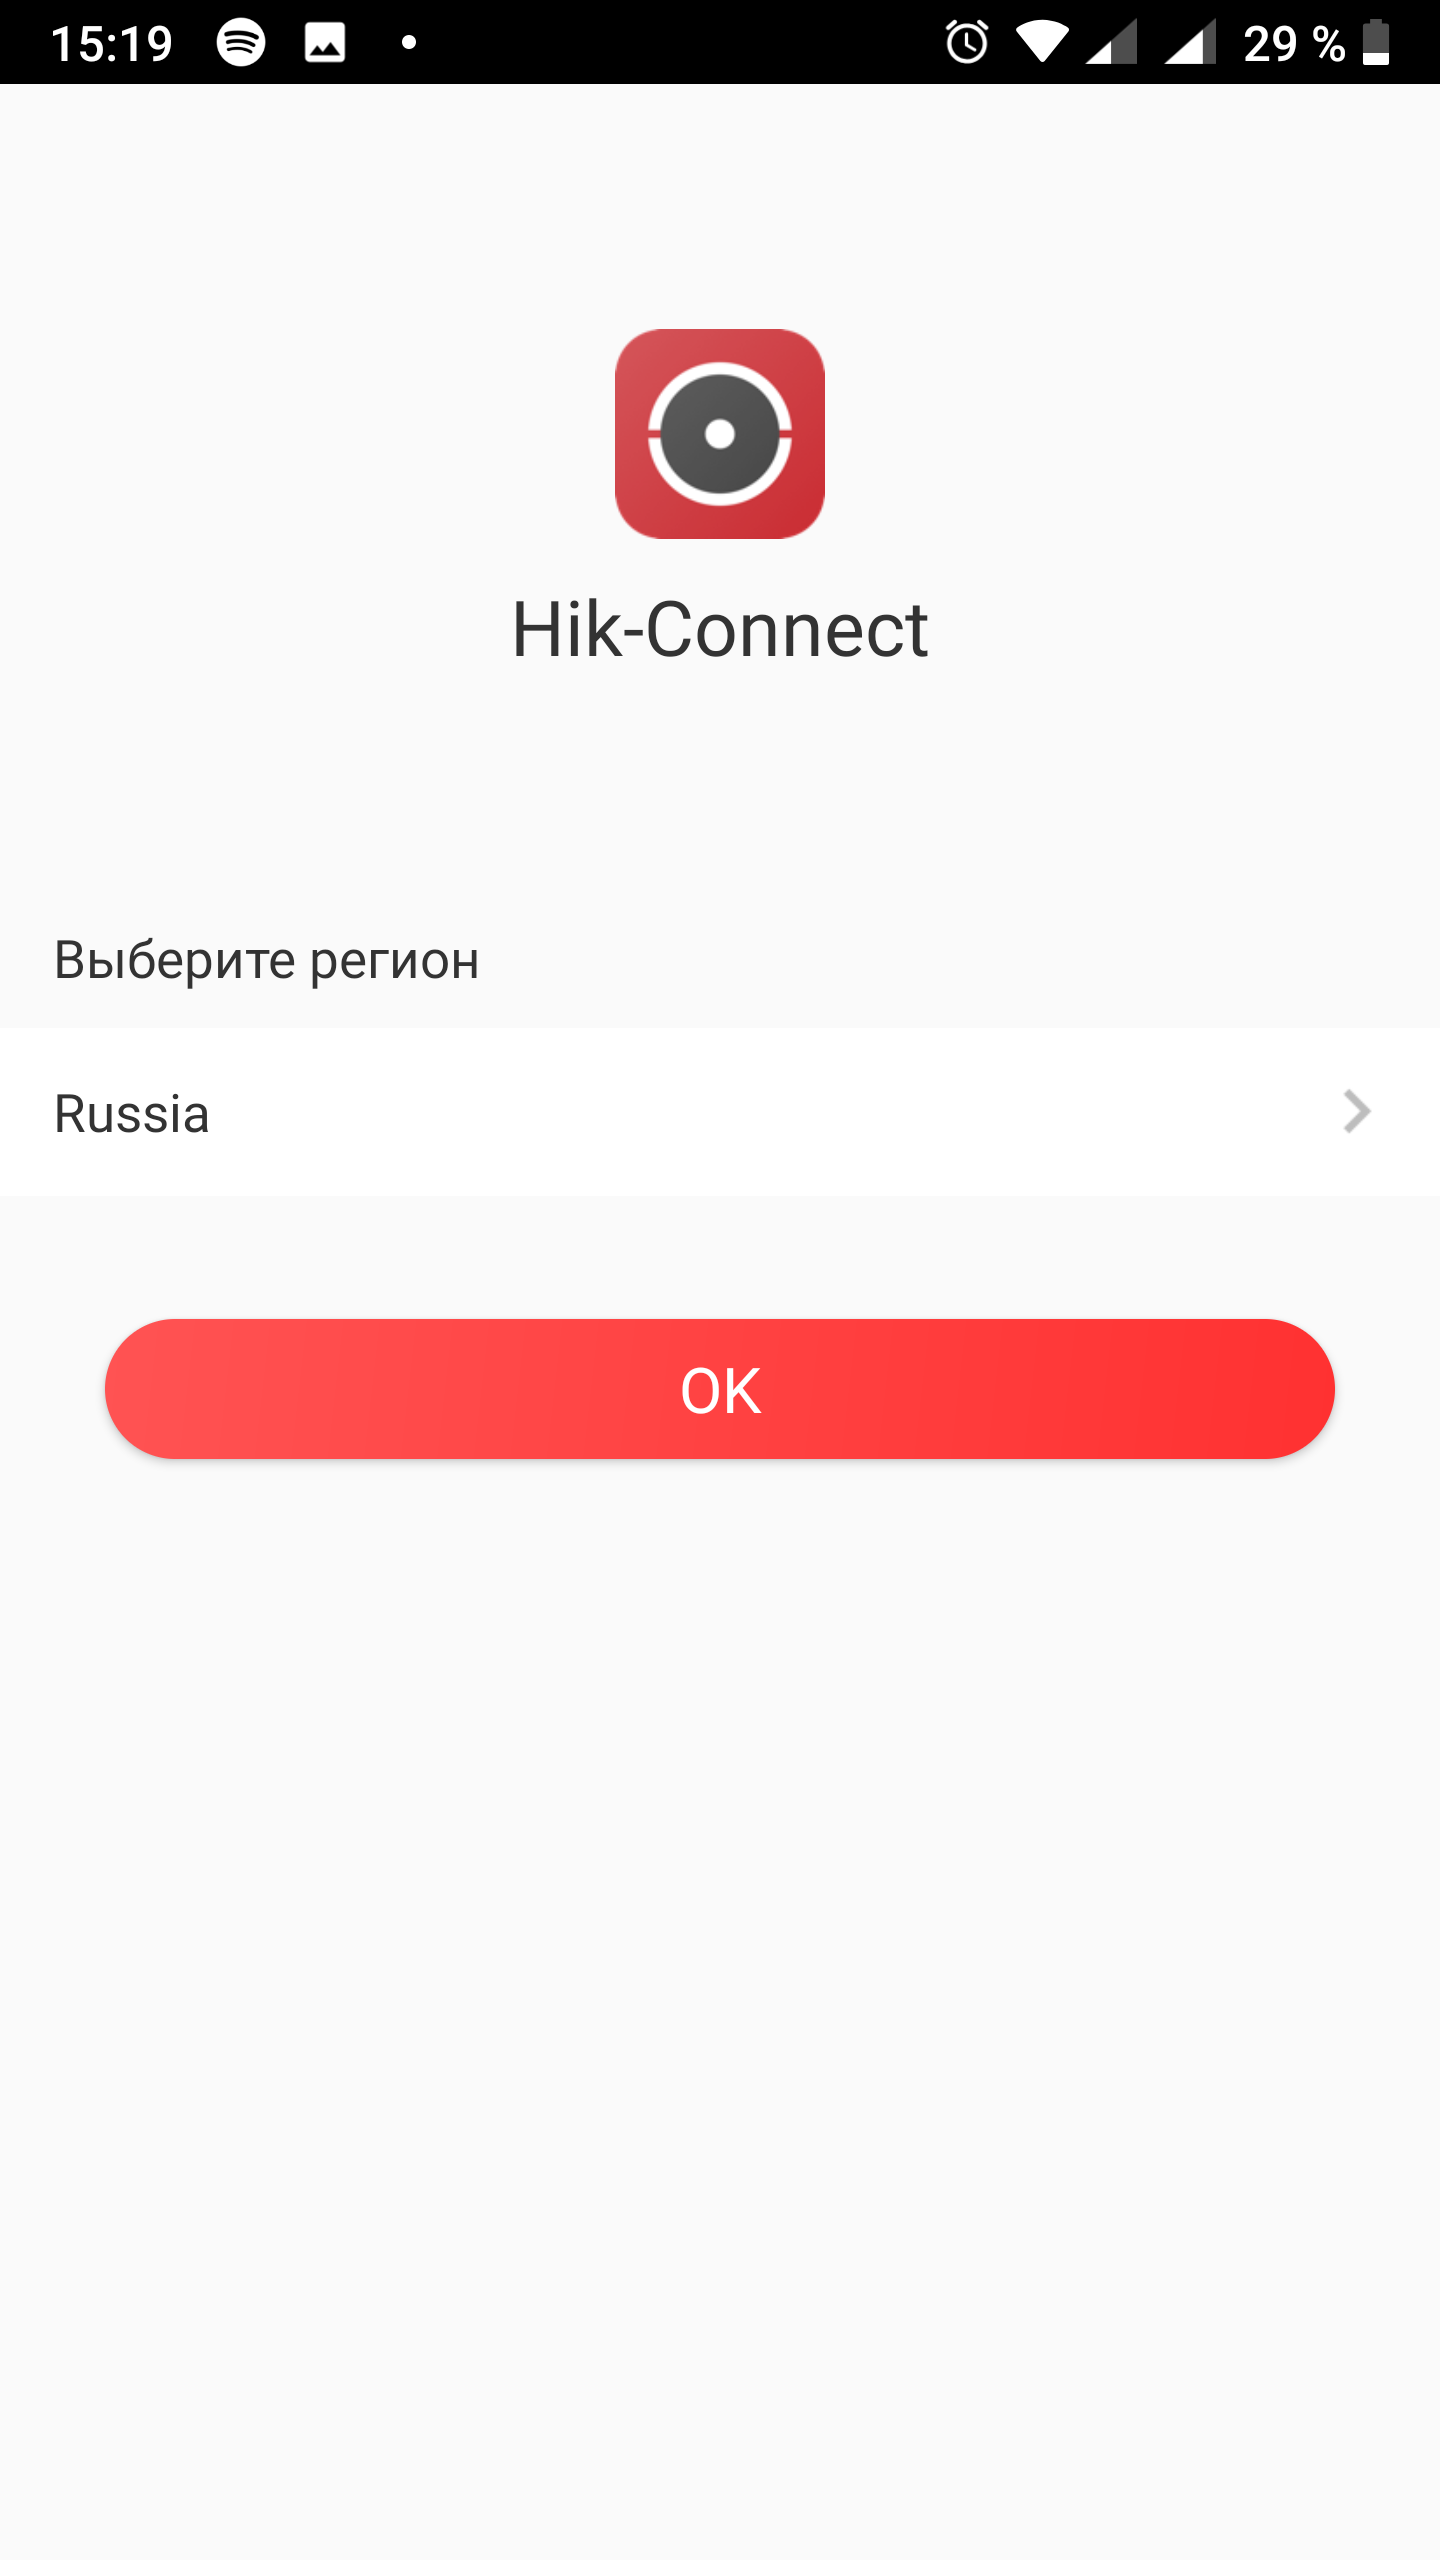 hik-connect-install-4.png